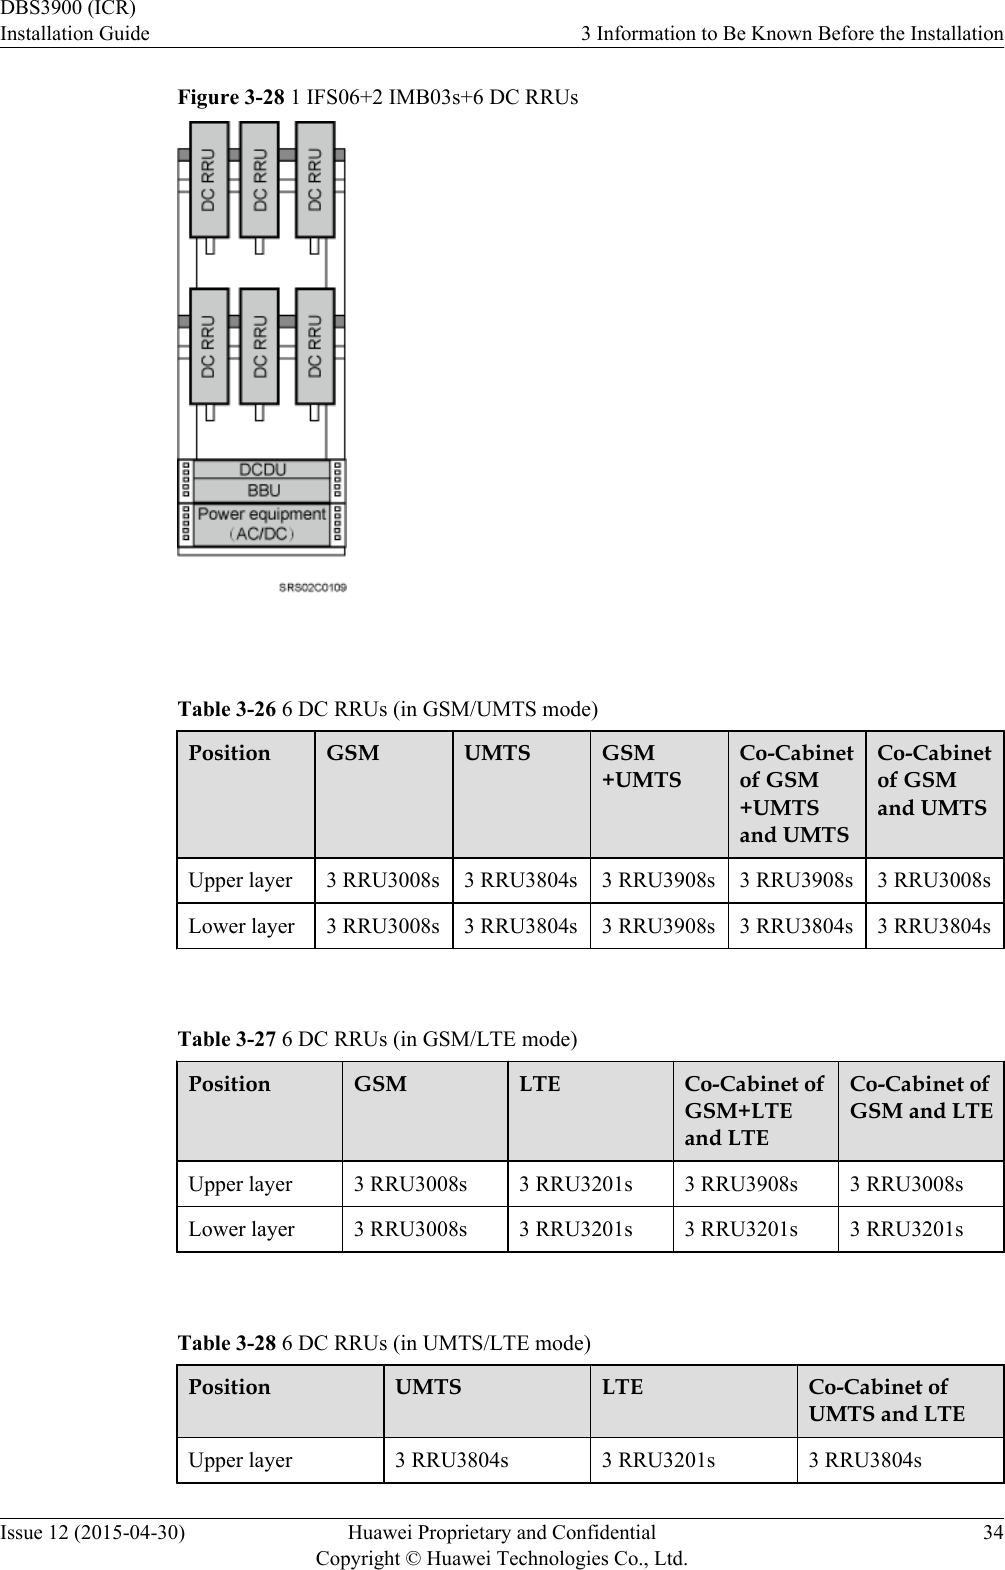 Figure 3-28 1 IFS06+2 IMB03s+6 DC RRUs Table 3-26 6 DC RRUs (in GSM/UMTS mode)Position GSM UMTS GSM+UMTSCo-Cabinetof GSM+UMTSand UMTSCo-Cabinetof GSMand UMTSUpper layer 3 RRU3008s 3 RRU3804s 3 RRU3908s 3 RRU3908s 3 RRU3008sLower layer 3 RRU3008s 3 RRU3804s 3 RRU3908s 3 RRU3804s 3 RRU3804s Table 3-27 6 DC RRUs (in GSM/LTE mode)Position GSM LTE Co-Cabinet ofGSM+LTEand LTECo-Cabinet ofGSM and LTEUpper layer 3 RRU3008s 3 RRU3201s 3 RRU3908s 3 RRU3008sLower layer 3 RRU3008s 3 RRU3201s 3 RRU3201s 3 RRU3201s Table 3-28 6 DC RRUs (in UMTS/LTE mode)Position UMTS LTE Co-Cabinet ofUMTS and LTEUpper layer 3 RRU3804s 3 RRU3201s 3 RRU3804sDBS3900 (ICR)Installation Guide 3 Information to Be Known Before the InstallationIssue 12 (2015-04-30) Huawei Proprietary and ConfidentialCopyright © Huawei Technologies Co., Ltd.34